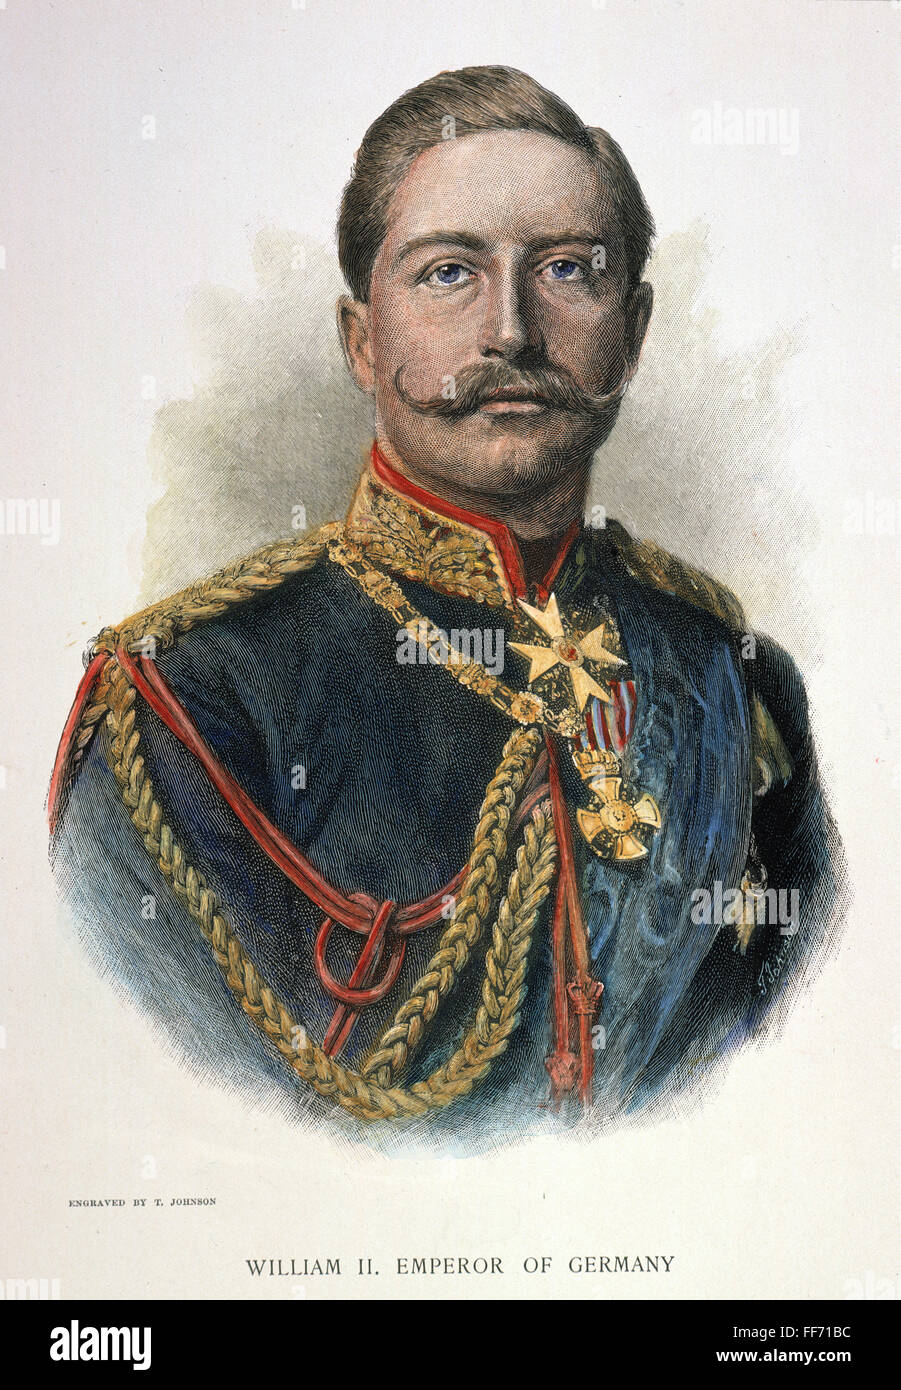 EMPEROR WILLIAM II /nof Germany (1859-1941). Wood engraving, c1890, by Thomas Johnson after a photograph. Stock Photo